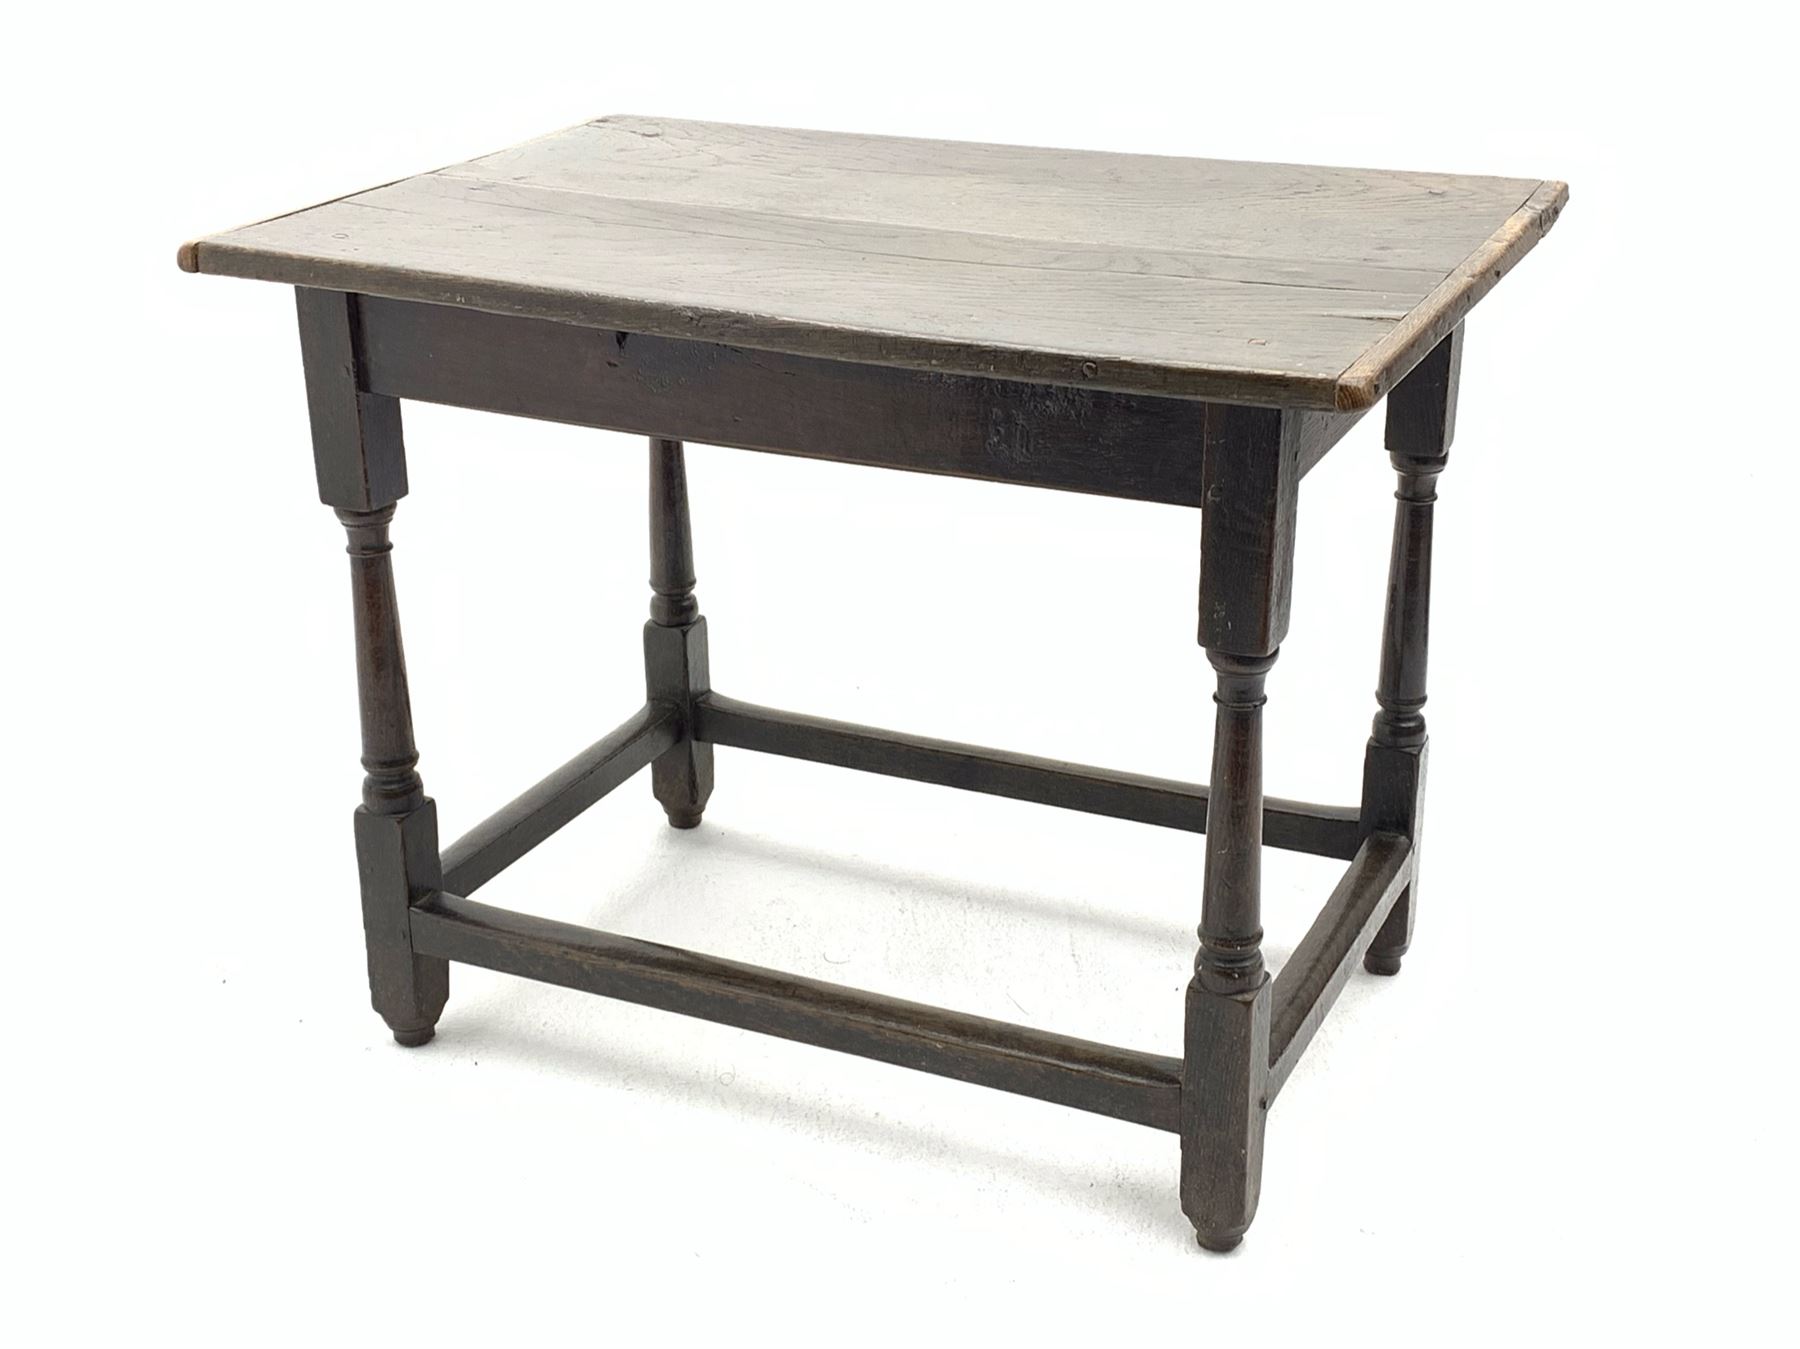 17th century oak joined table - Image 6 of 7